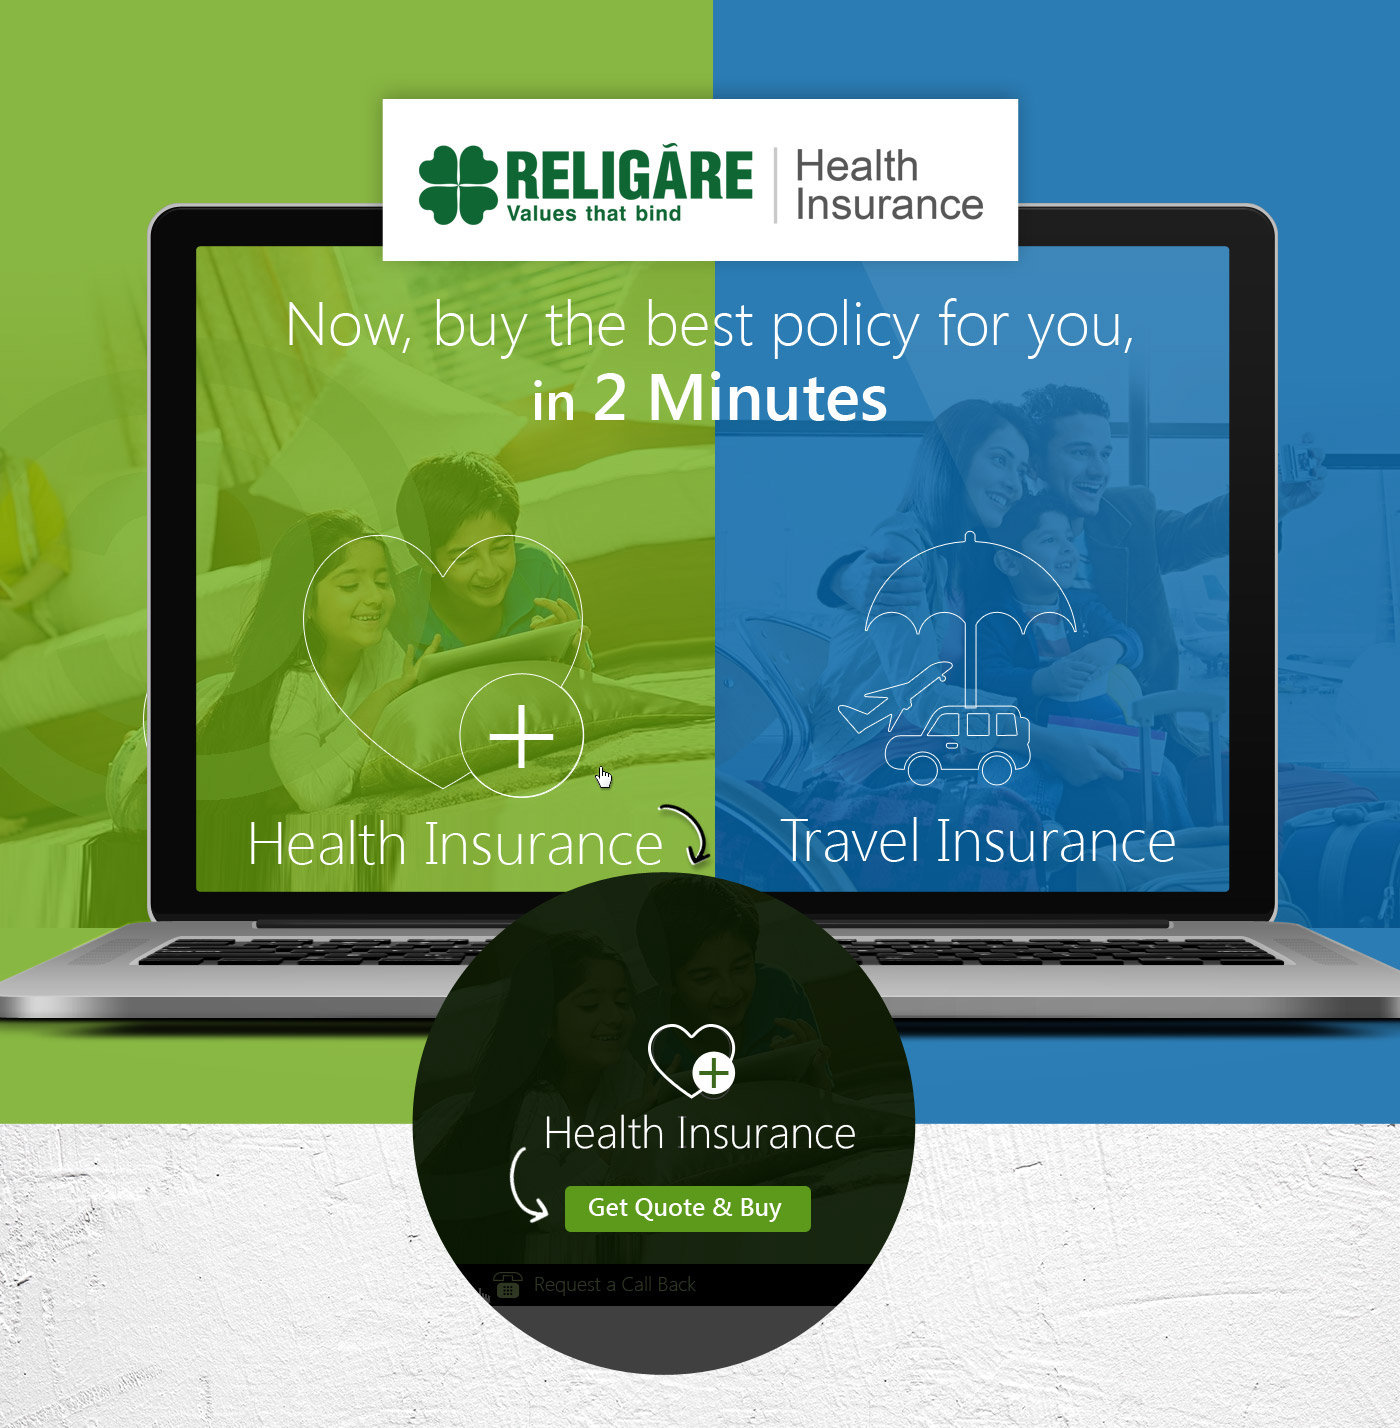 religare travel insurance from india to uk